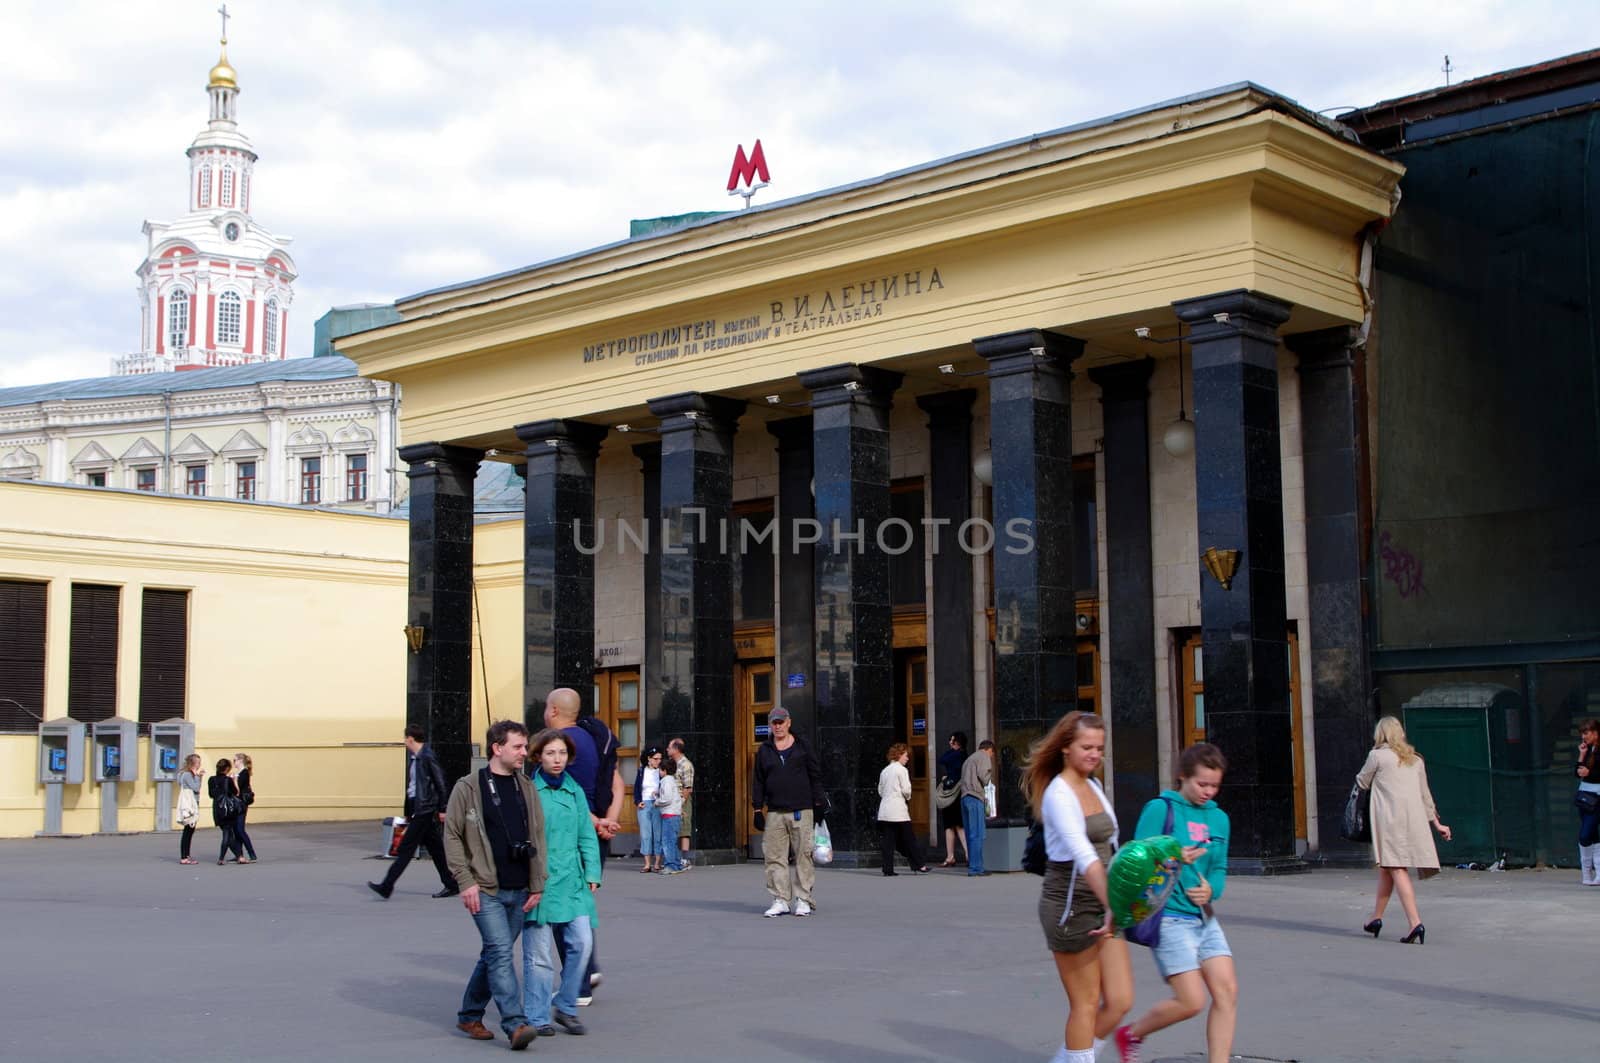 Moscow, Russia - June 14, 2010: Summer day. Peoples walk near the entrance of Teatral'naya metro station on June 14, 2010 in Moscow, Russia